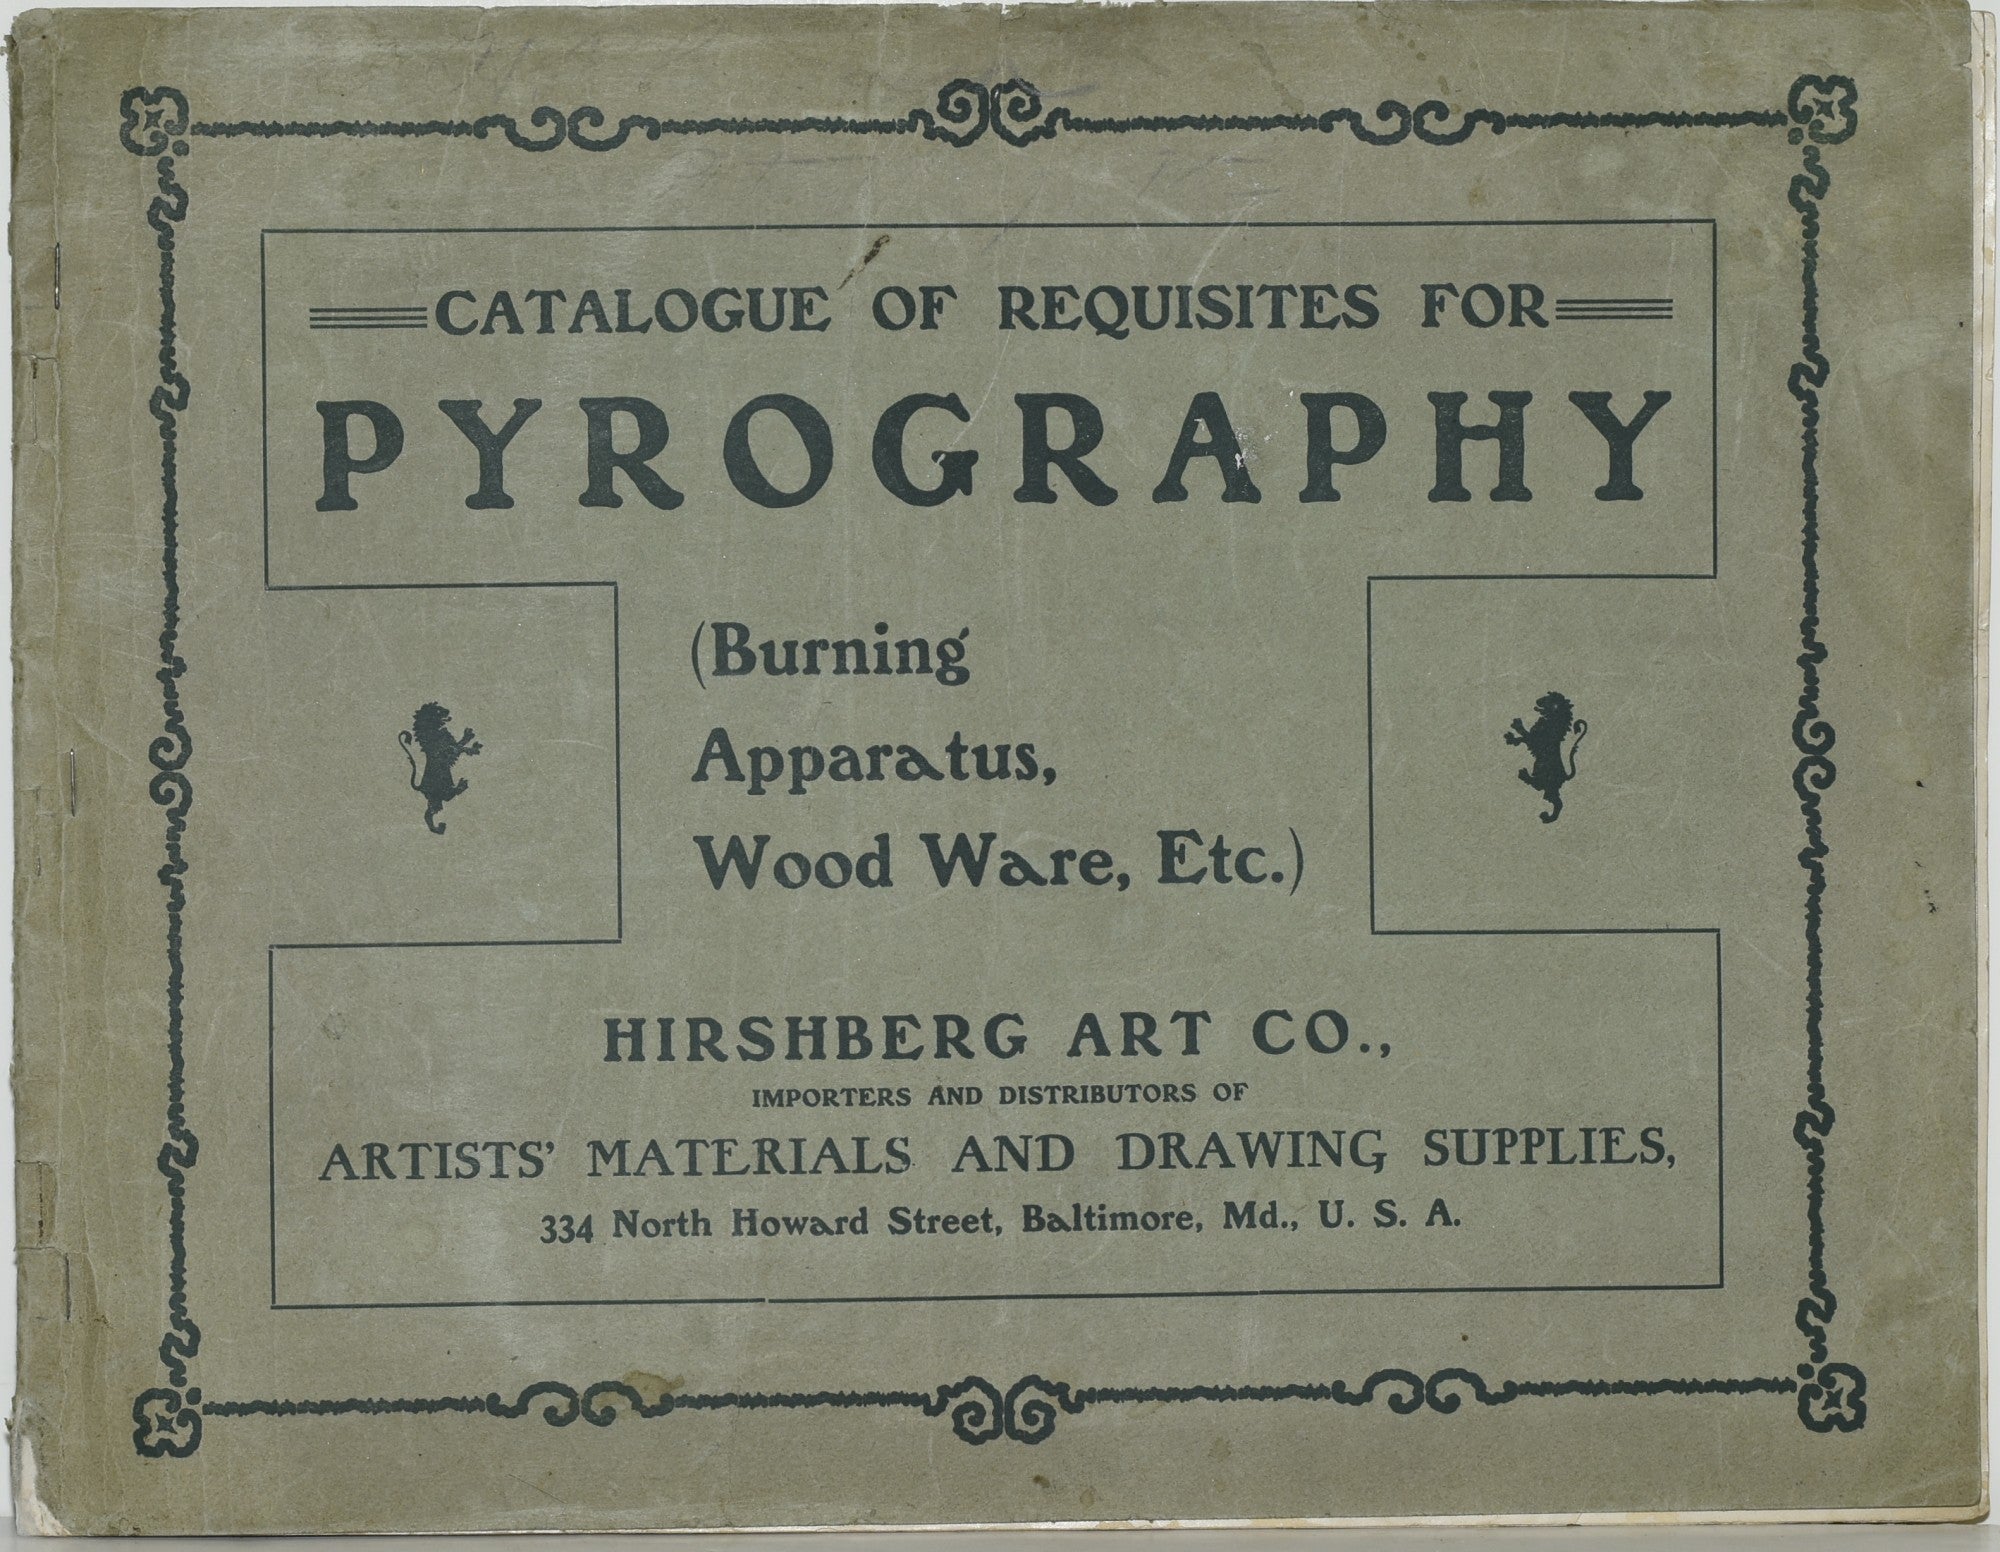 Materials for pyrography